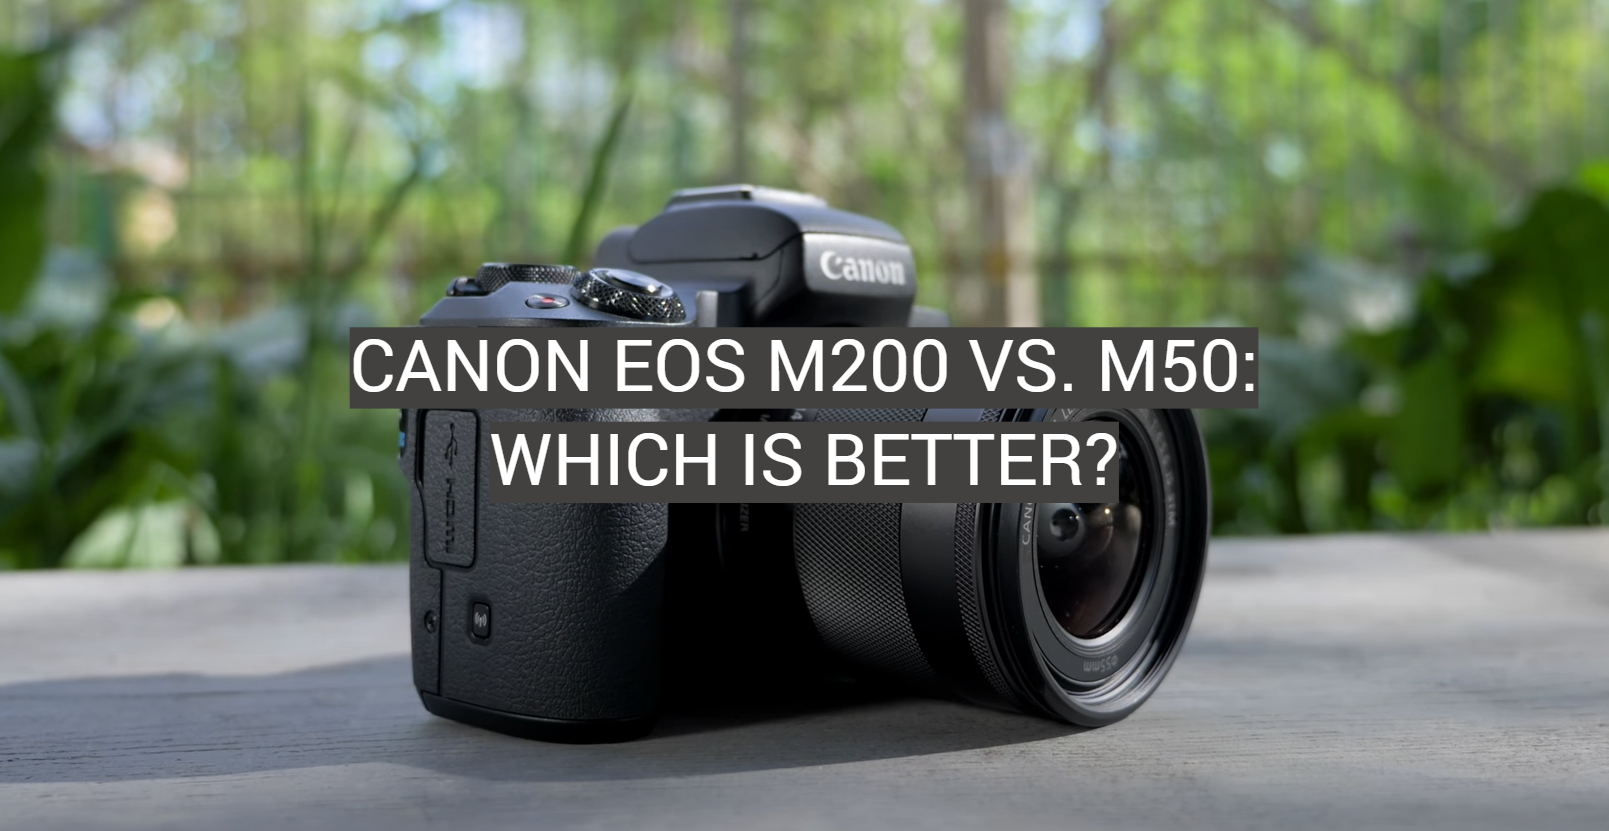 Harden tæppe varme Canon EOS M200 vs. M50: Which is Better? - FotoProfy